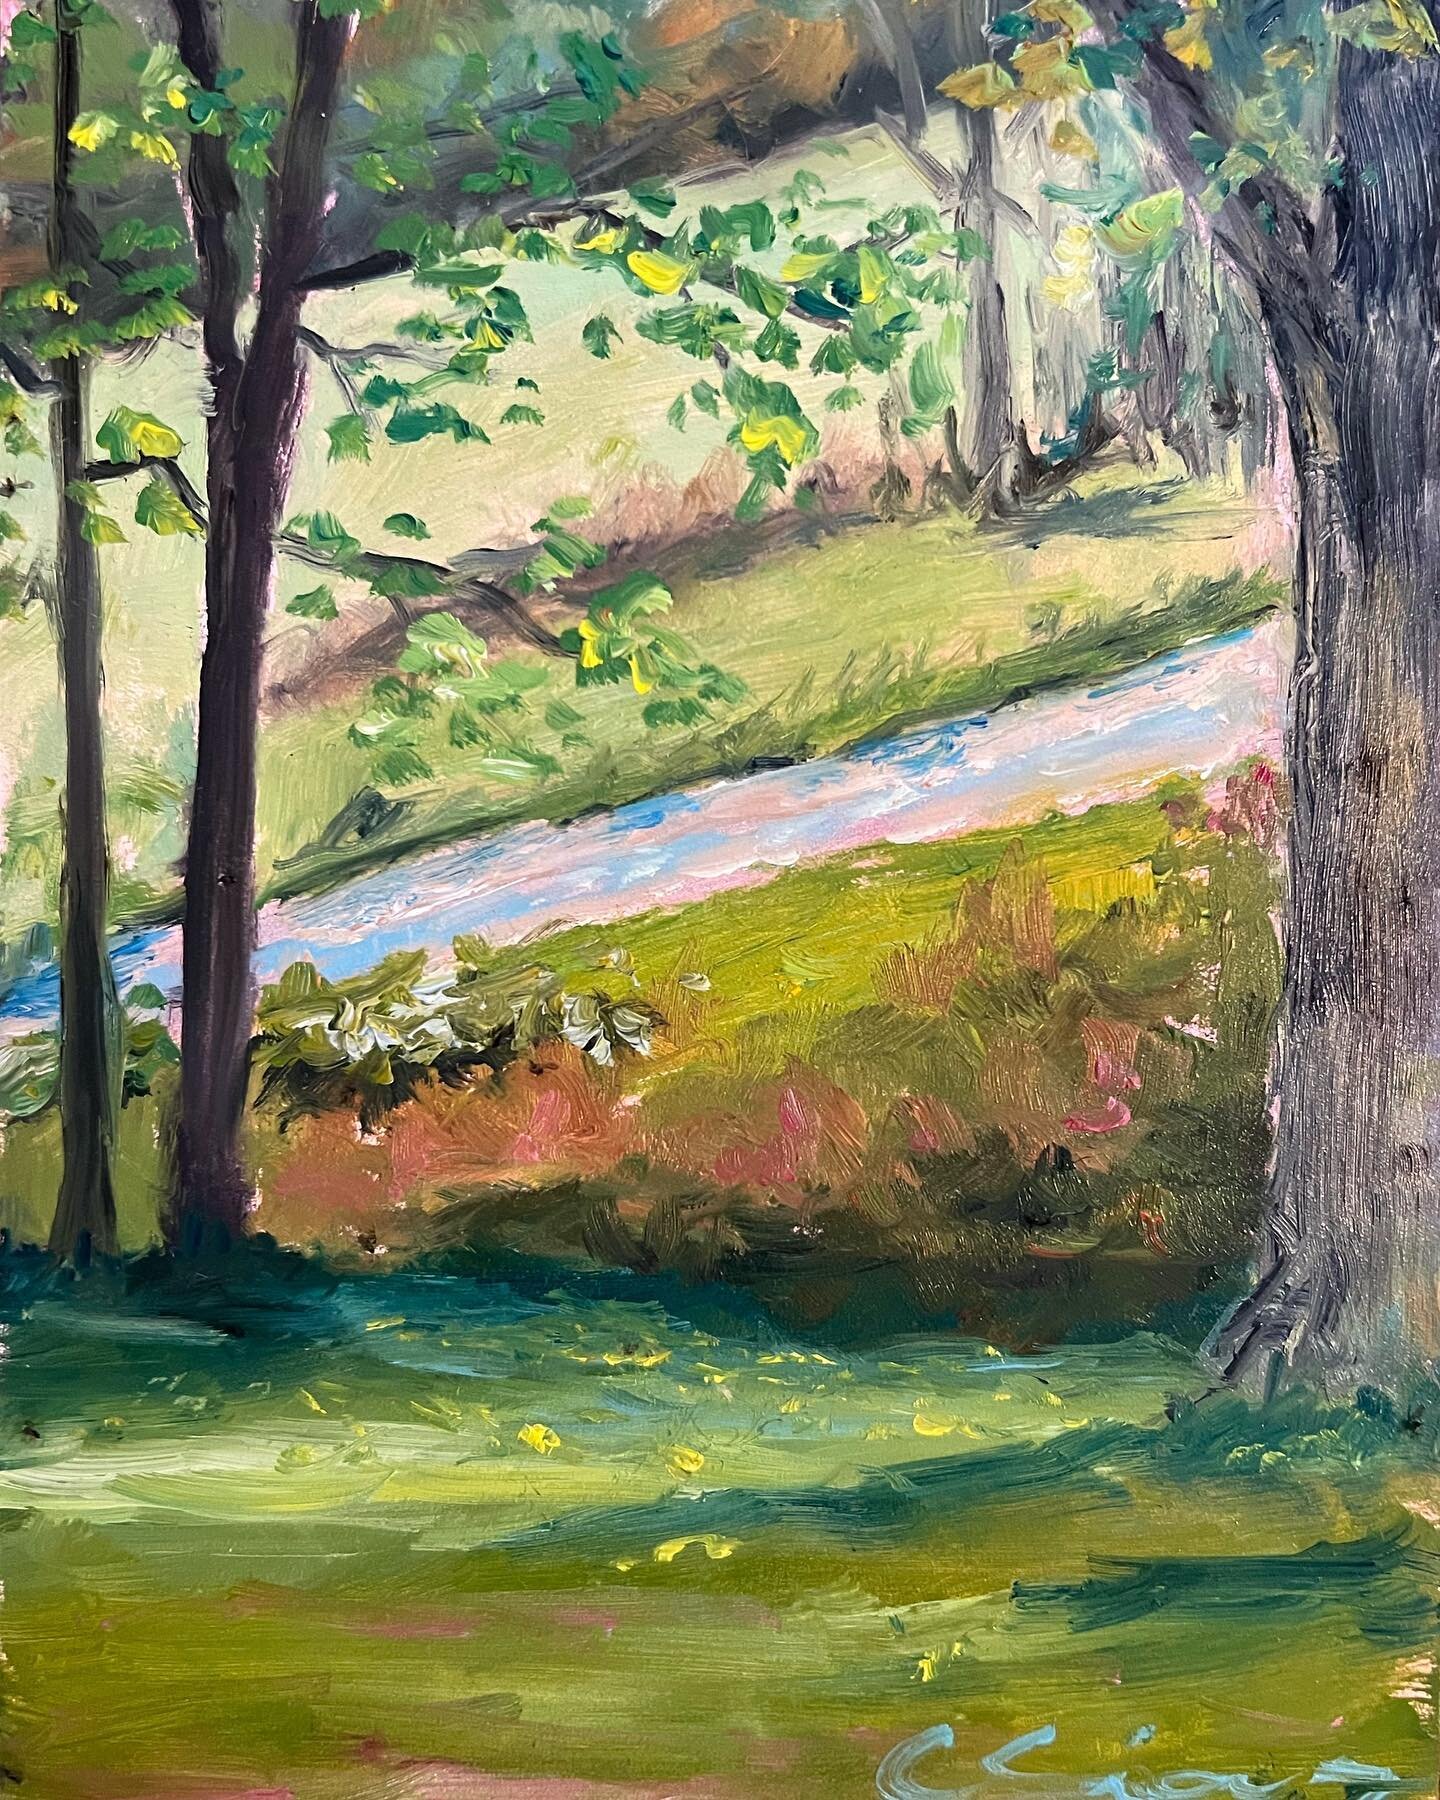 One of last week&rsquo;s paintings.💛 
I had set up to paint one scene turned around and saw this!✨ Put my first on pause and grabbed a small panel board to make a quick sketch of this driveway. I loved the tree&rsquo;s framing the road and the sunli